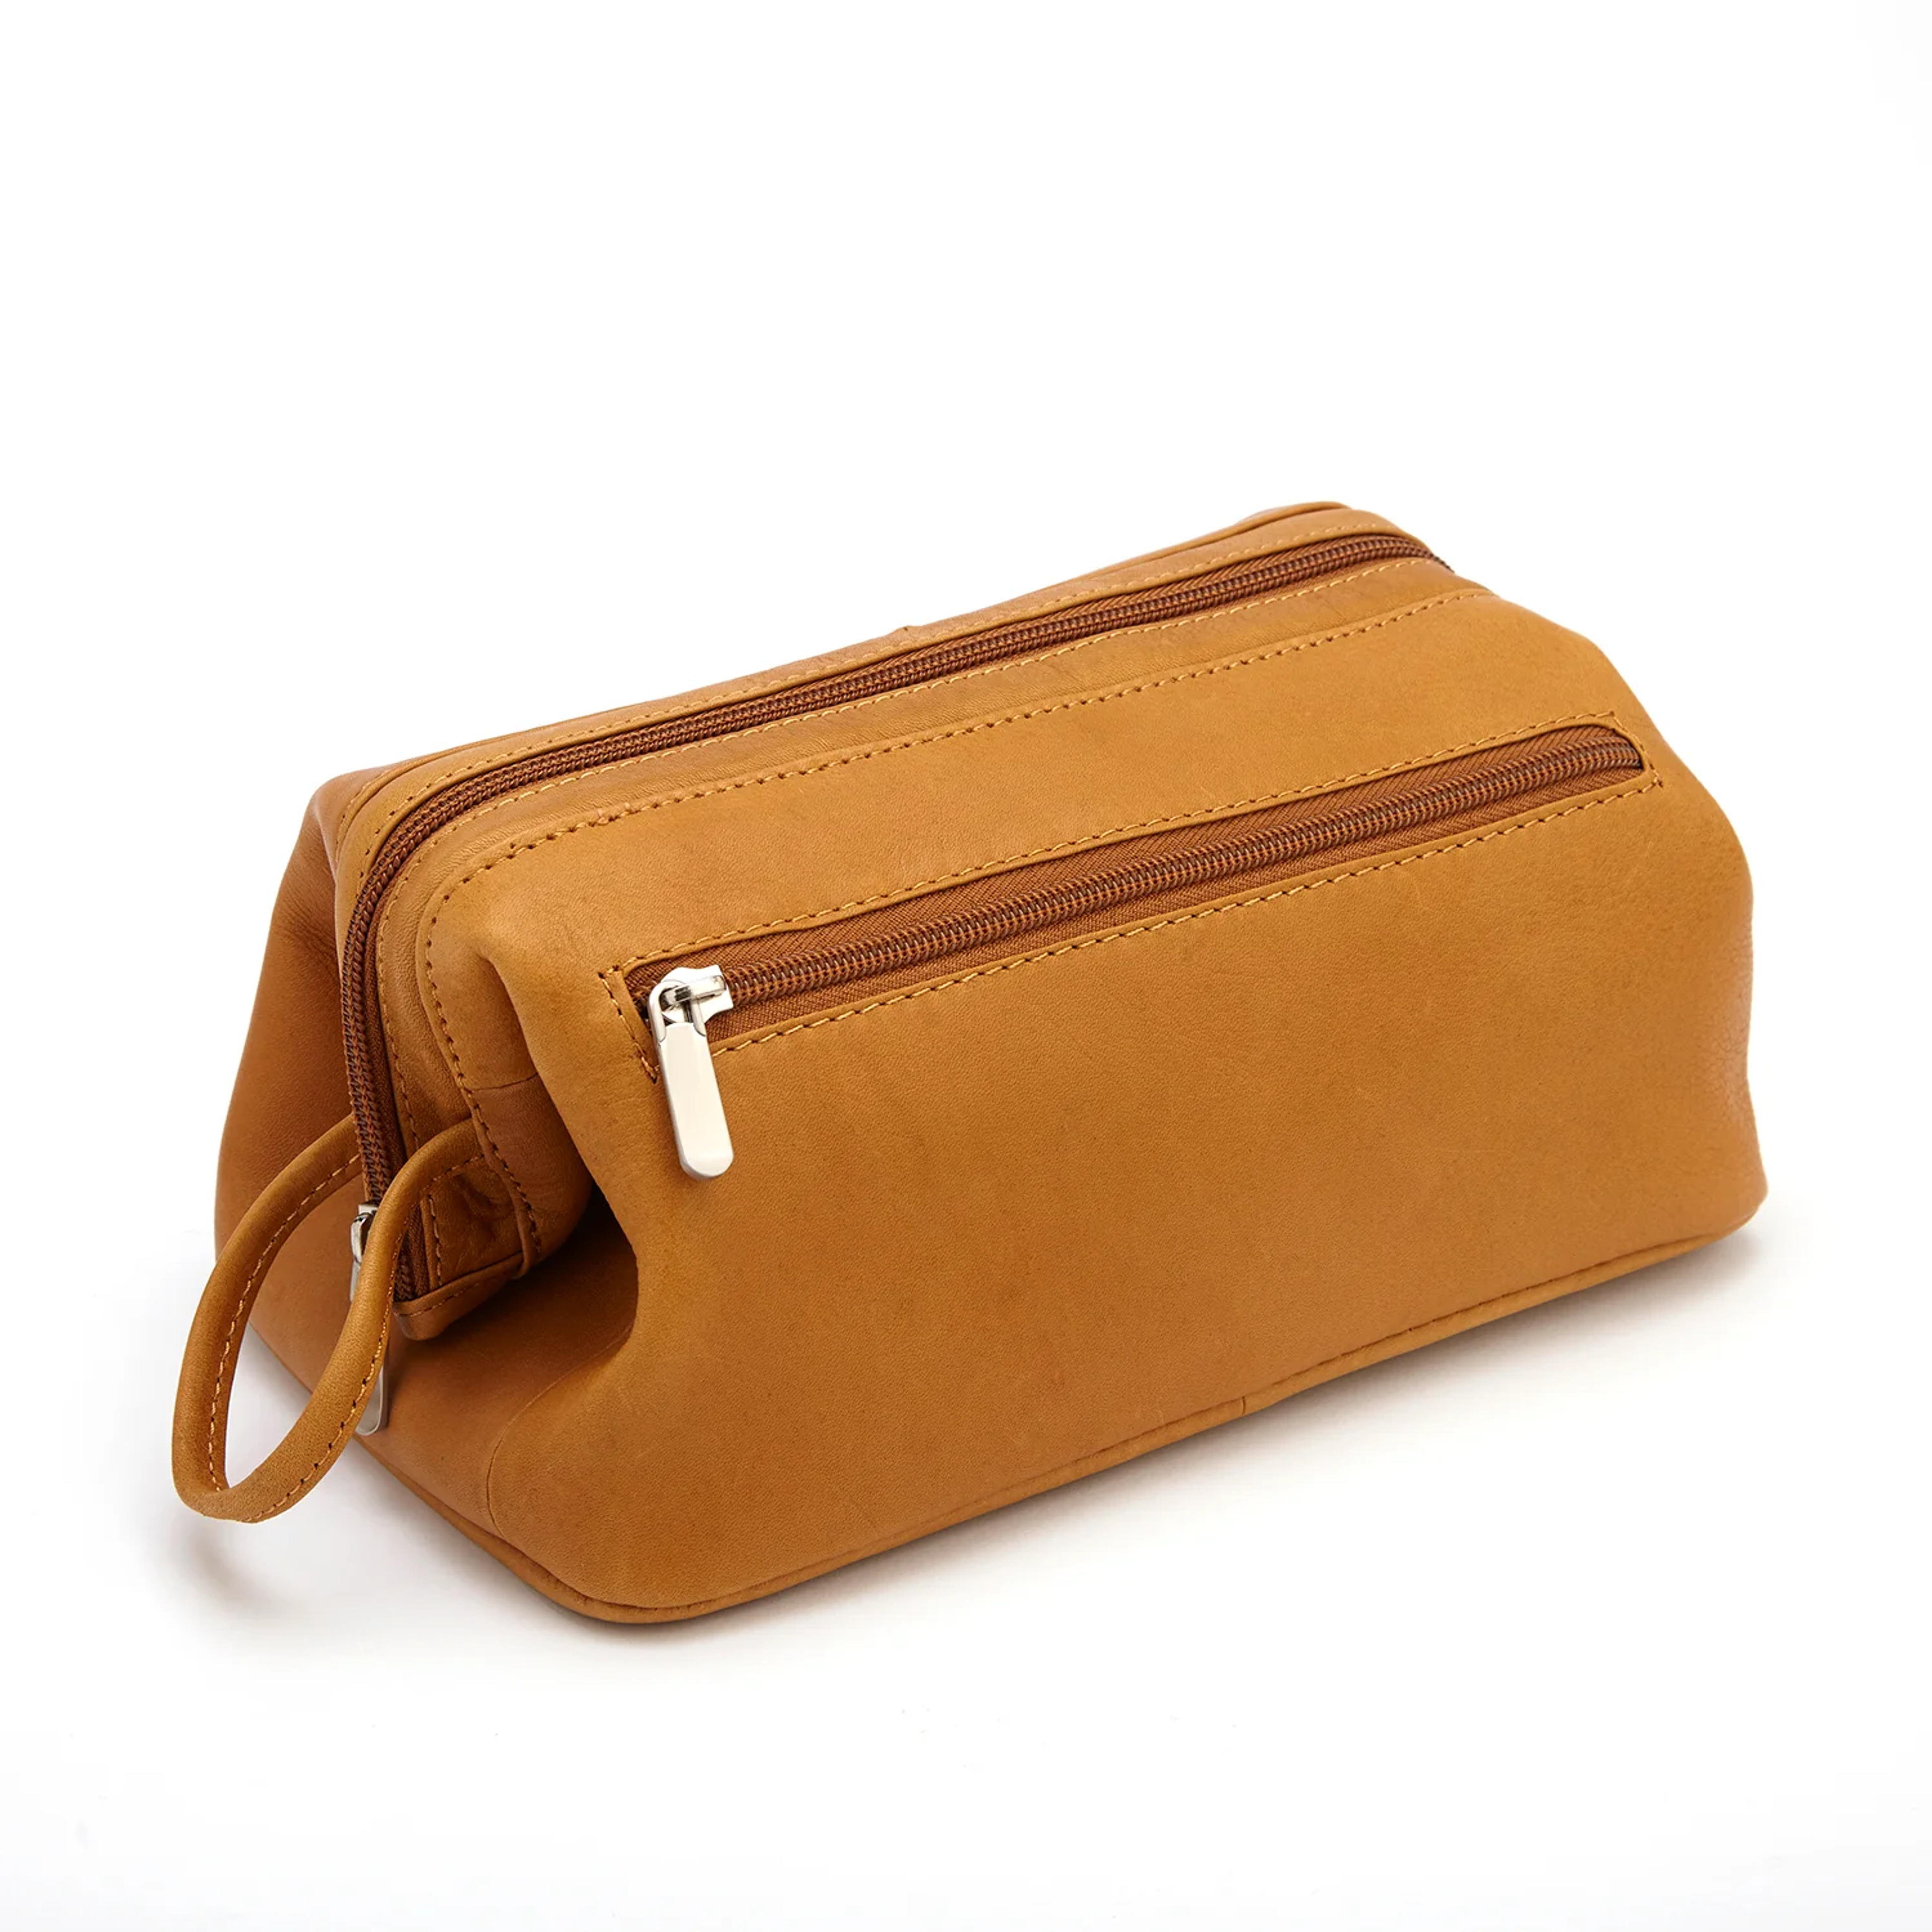 Colombian Leather Toiletry Bag – GQ Box